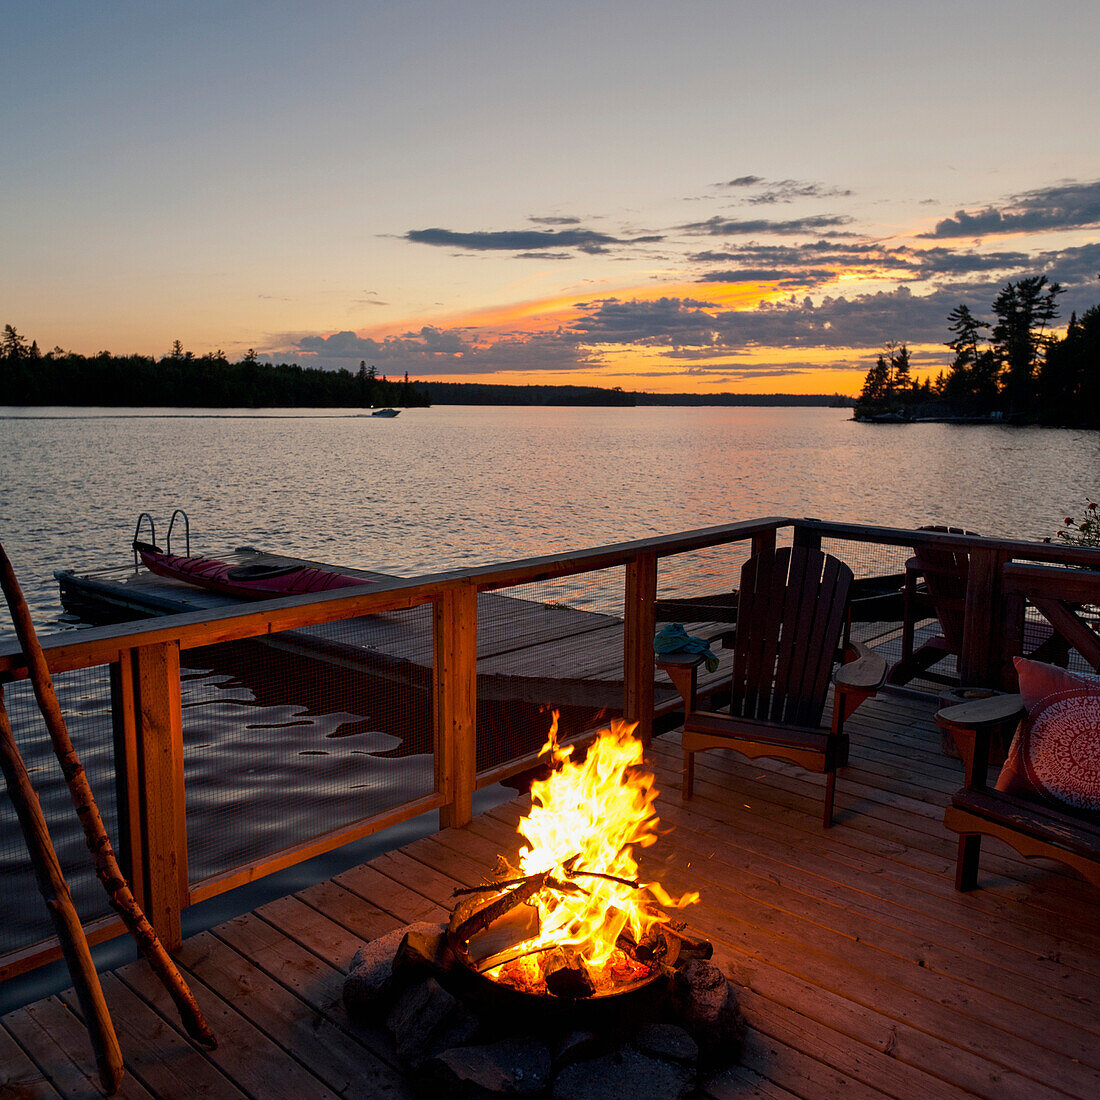 'Burning Fire On A Wooden Dock Along The Water's Edge At Sunset; Lake Of The Woods, Ontario, Canada'